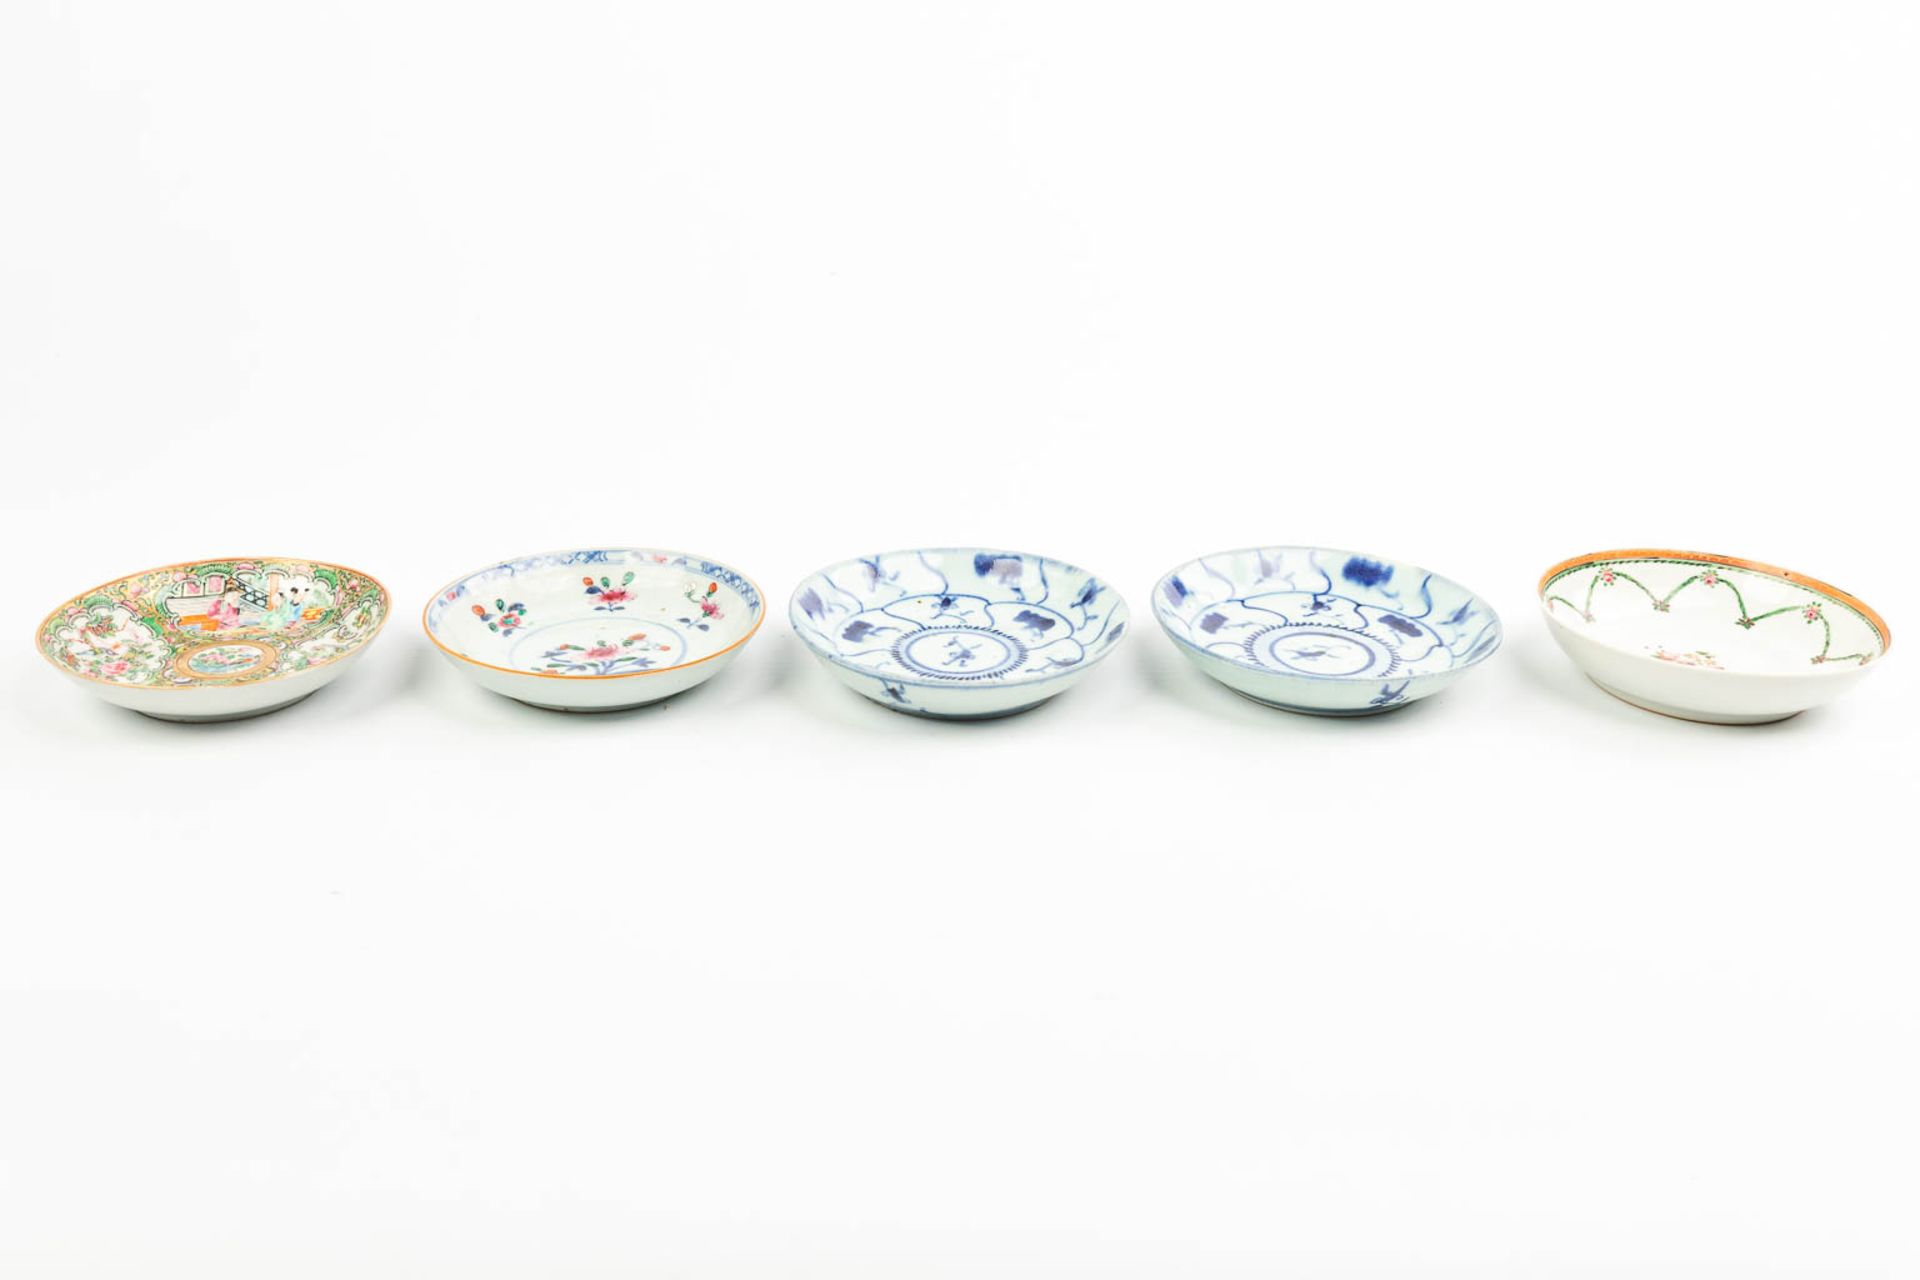 A collection of 5 plates made of Chinese porcelain with different patterns. - Image 6 of 15